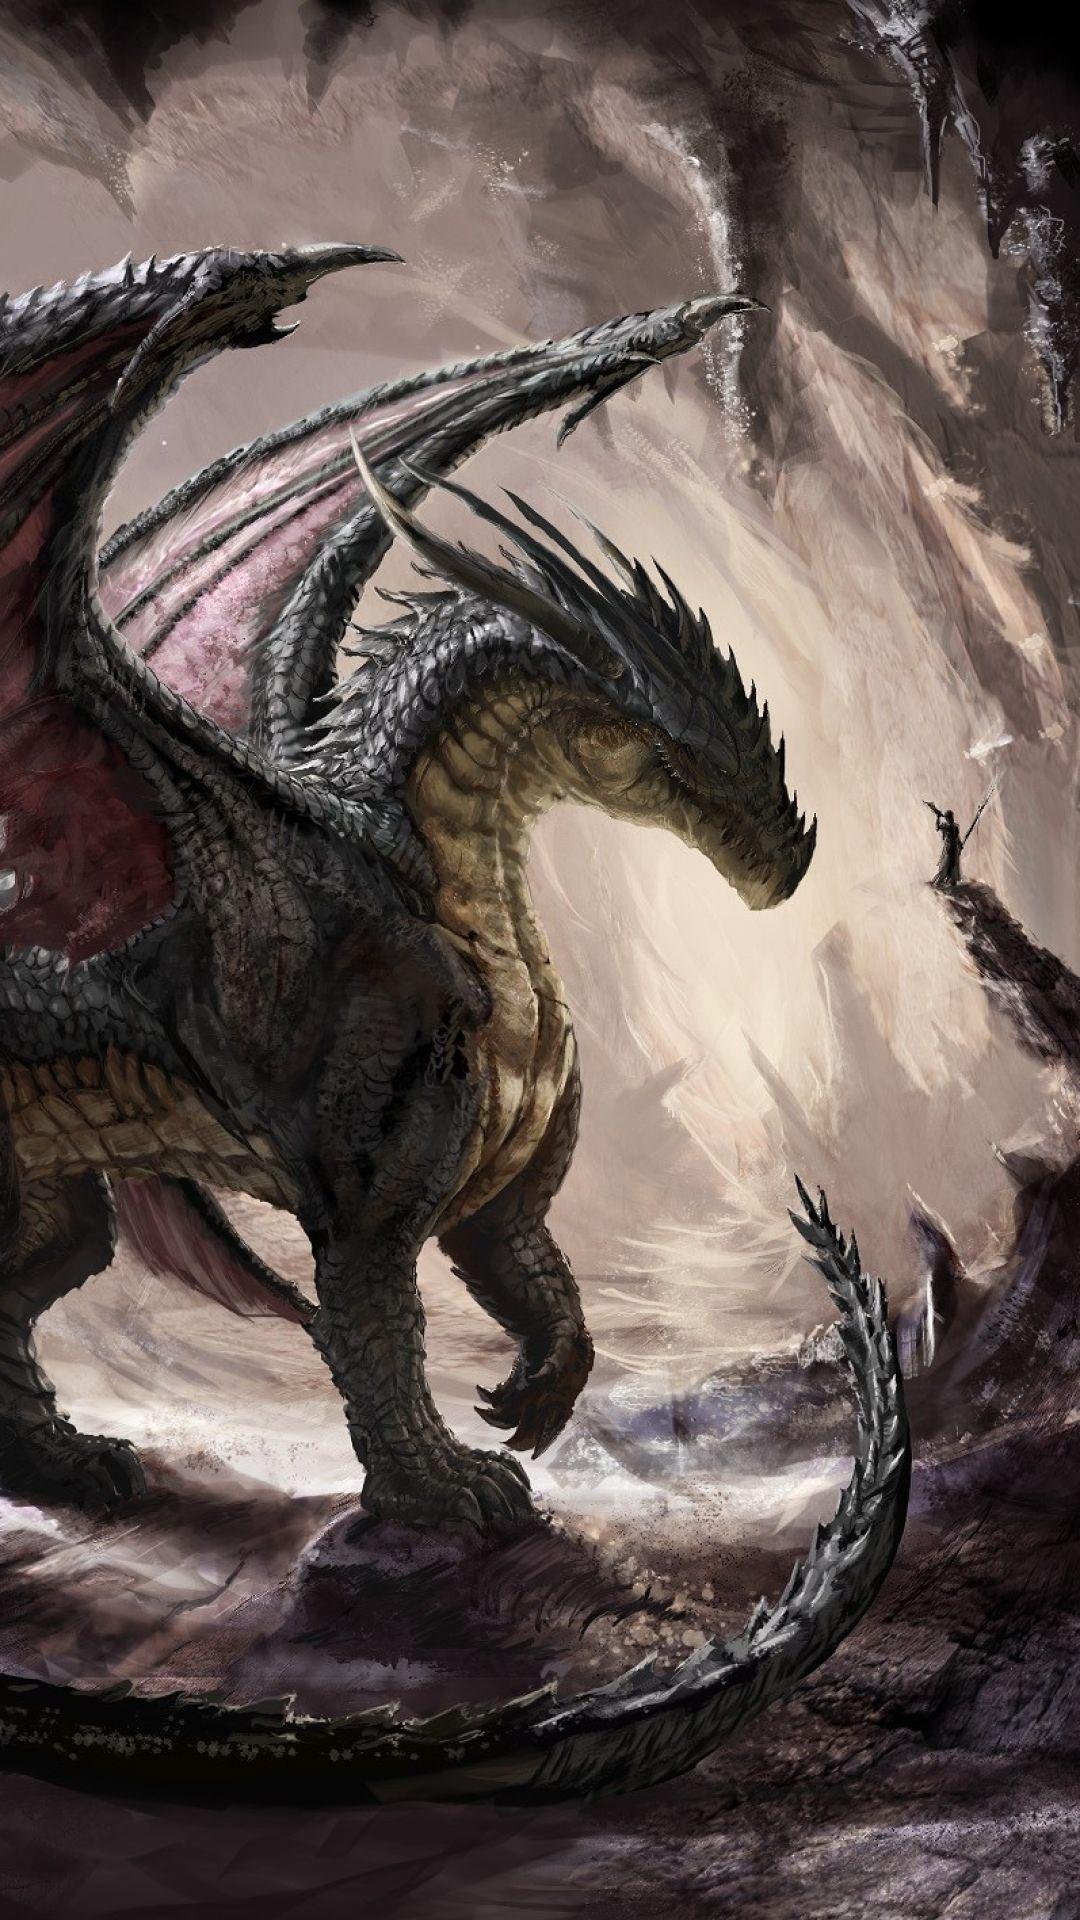 Dragon Android Wallpapers Top Free Dragon Android Backgrounds Wallpaperaccess